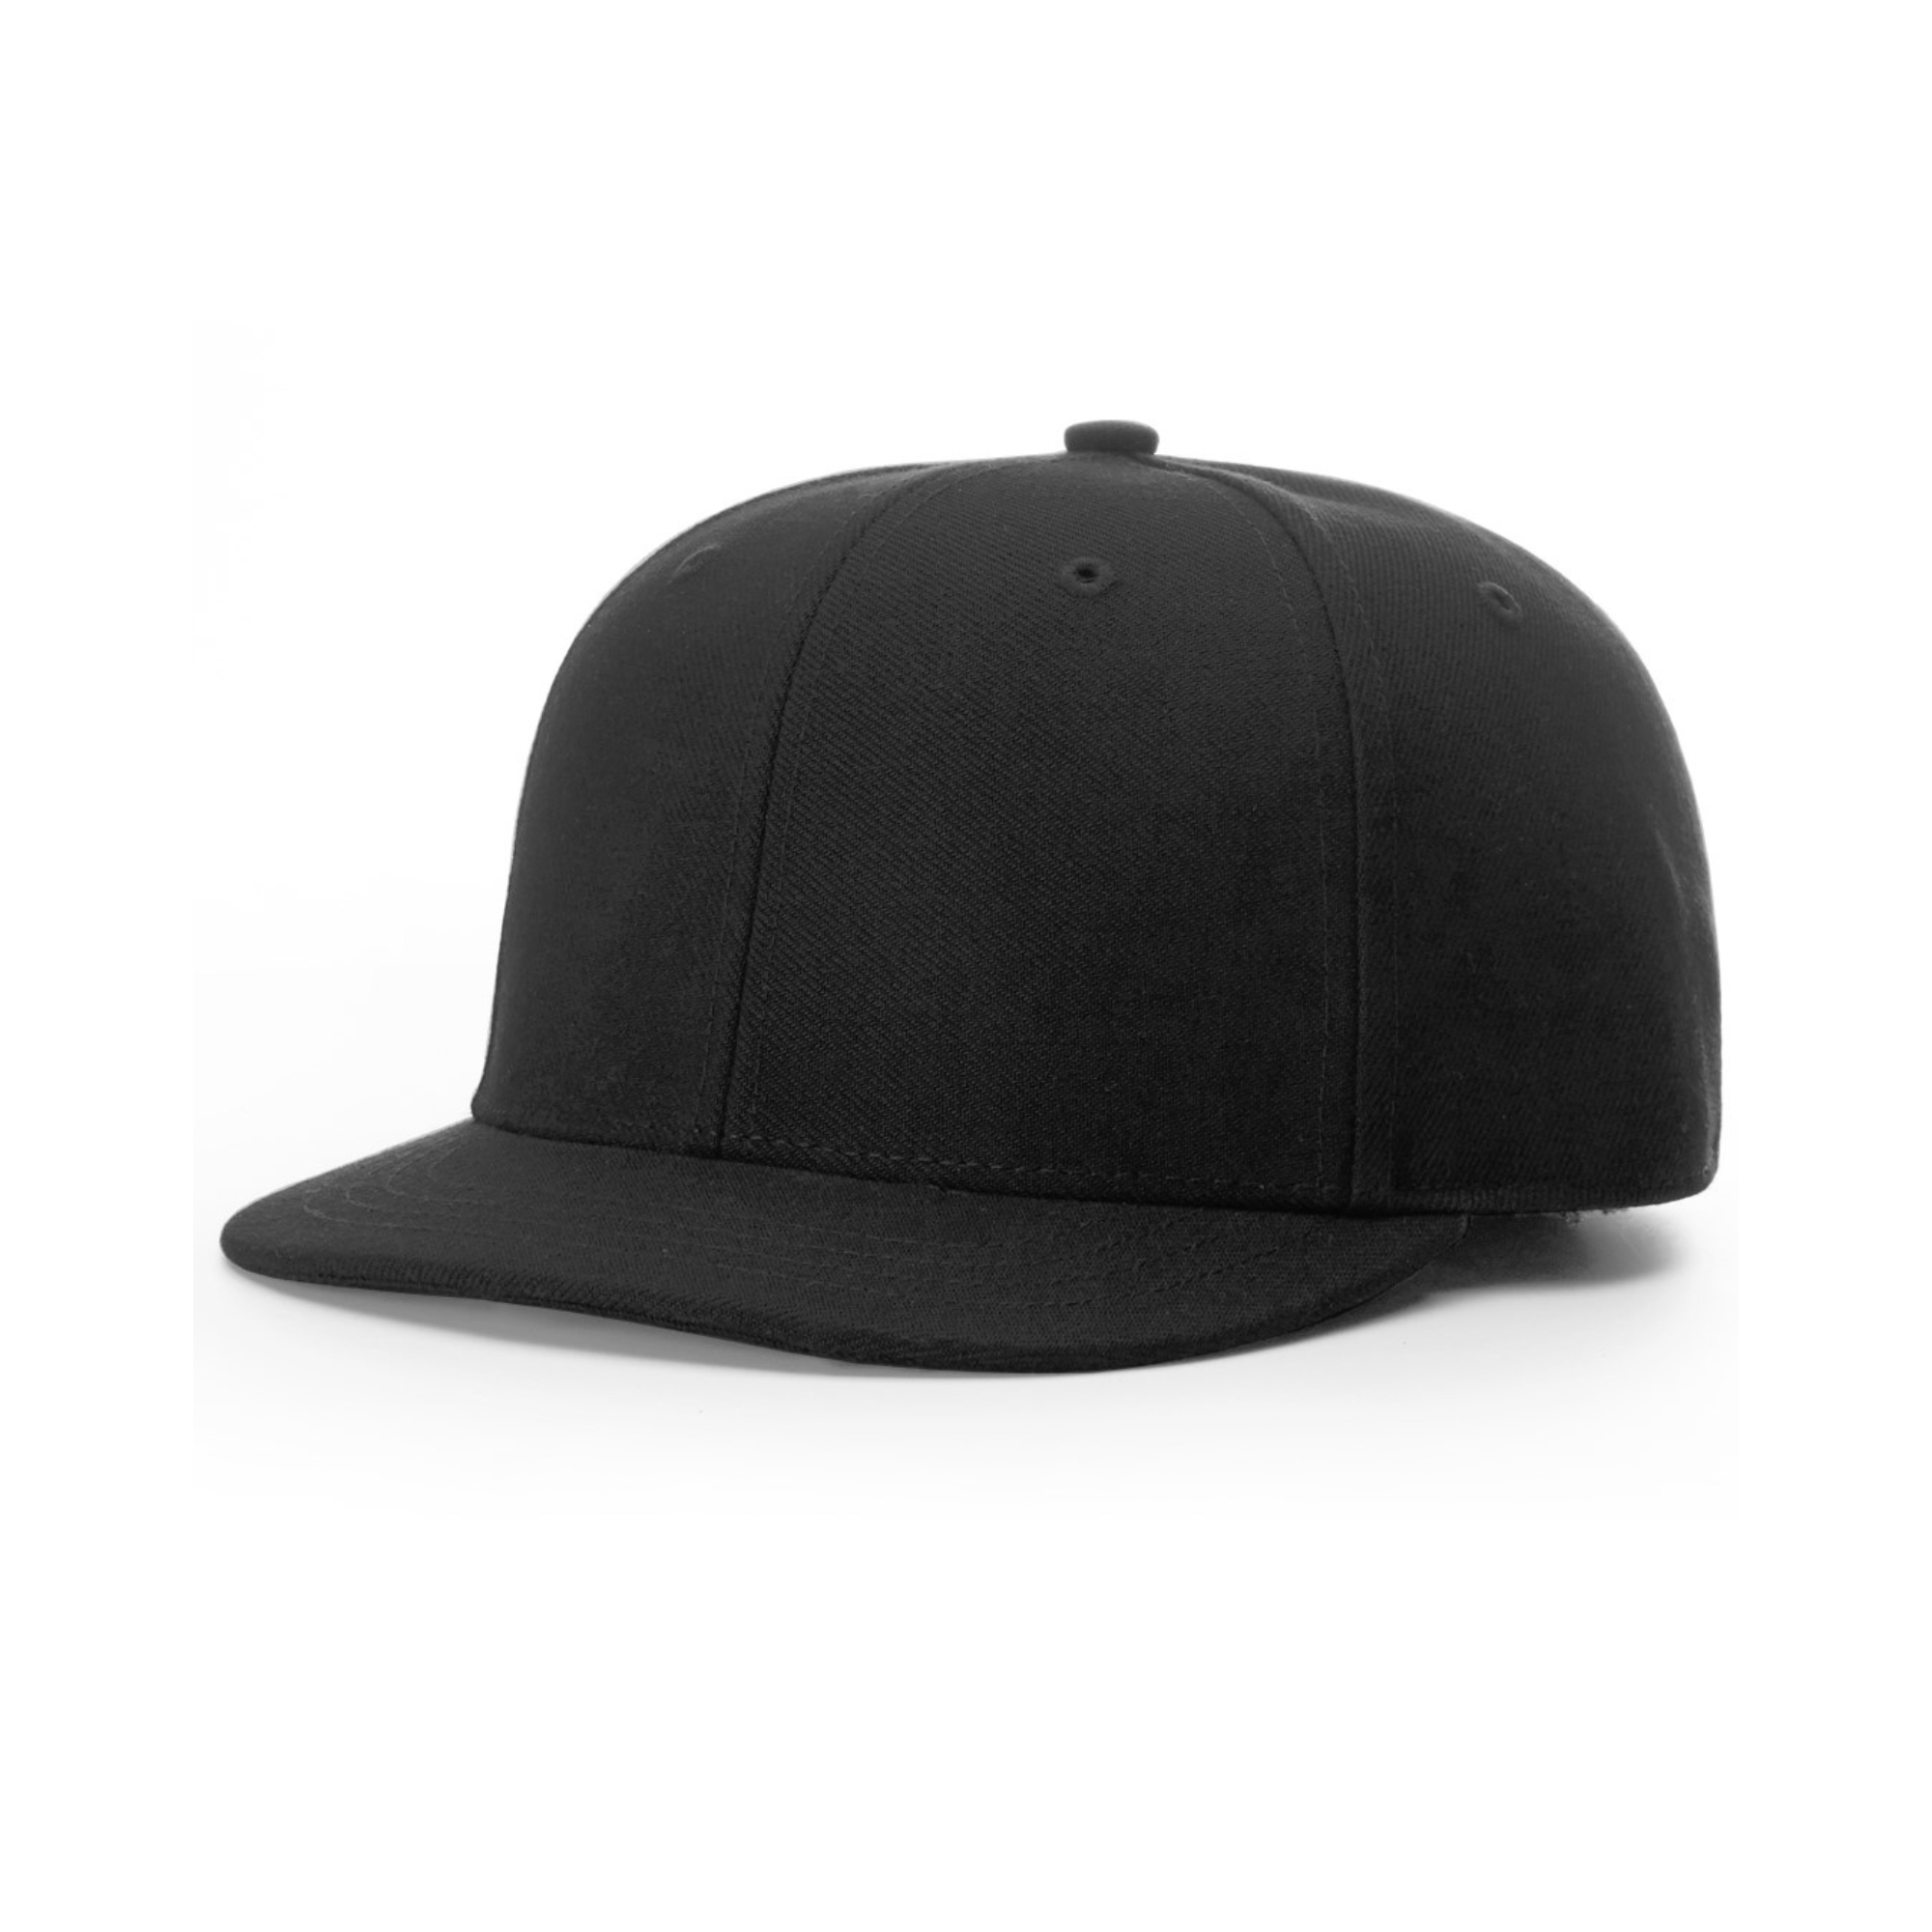 Richardson Top Choice Officials 4 Stitch Fitted Hat